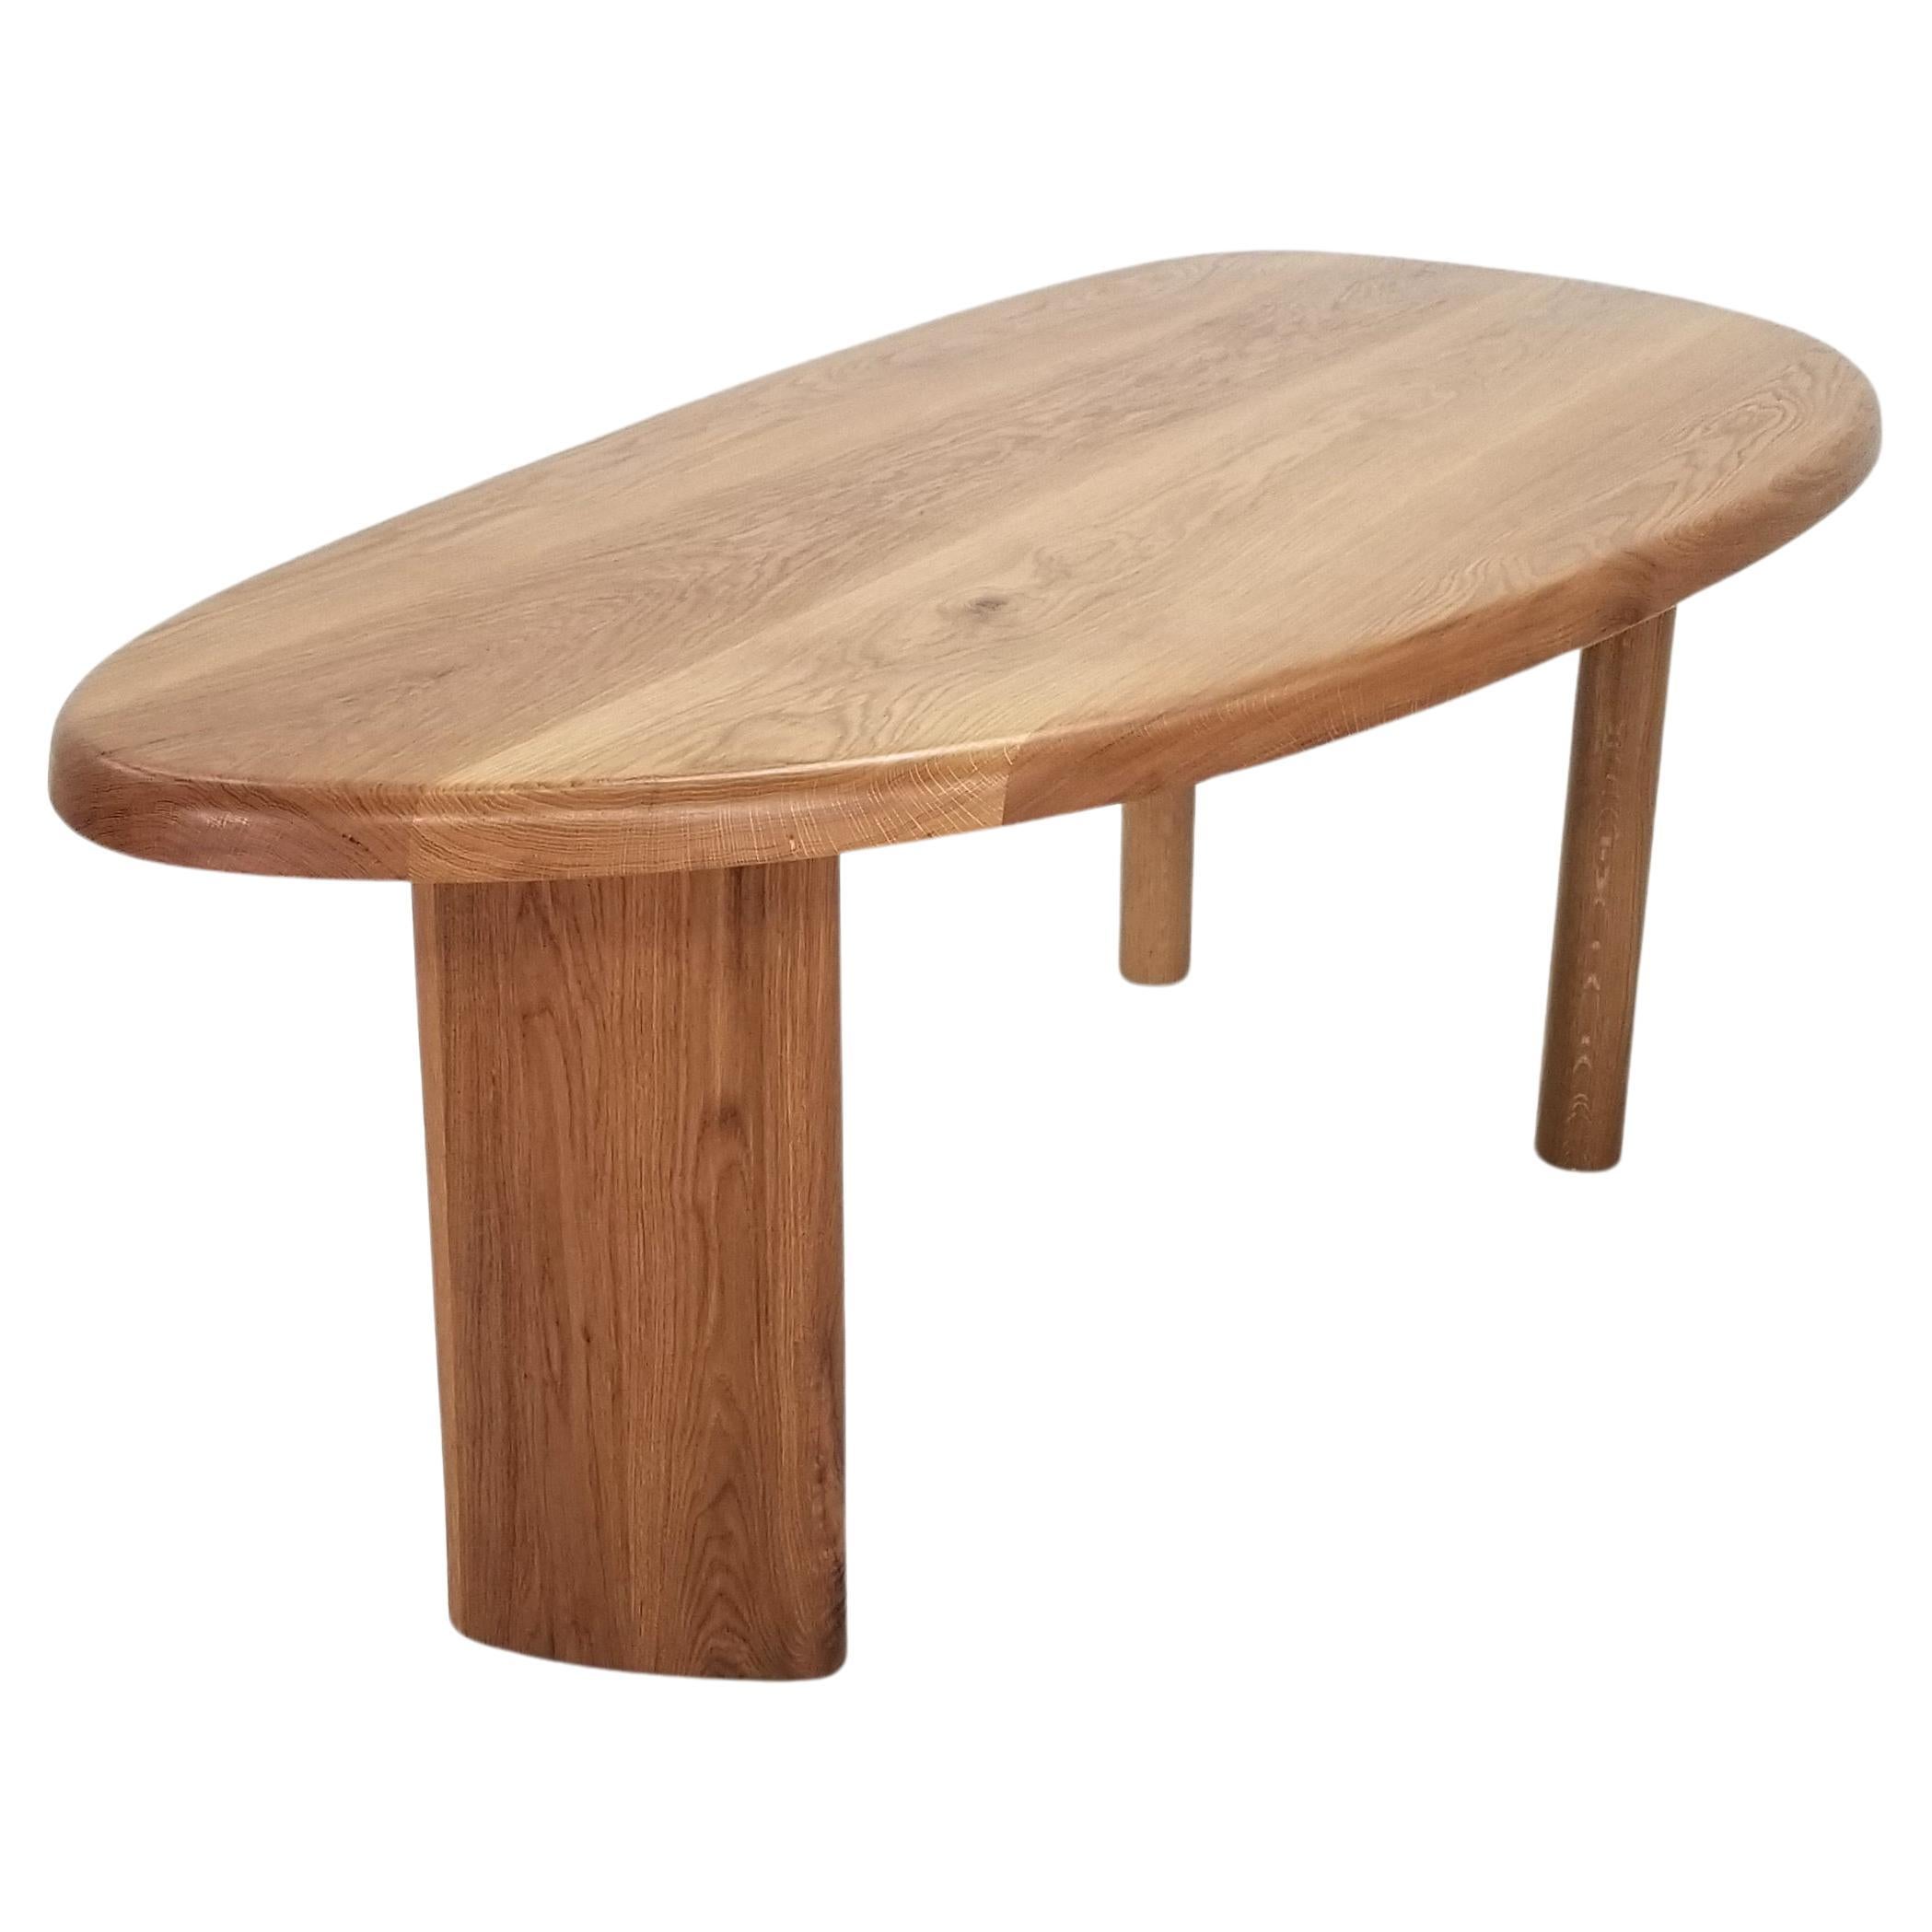 Free-Form White Oak Dining Table